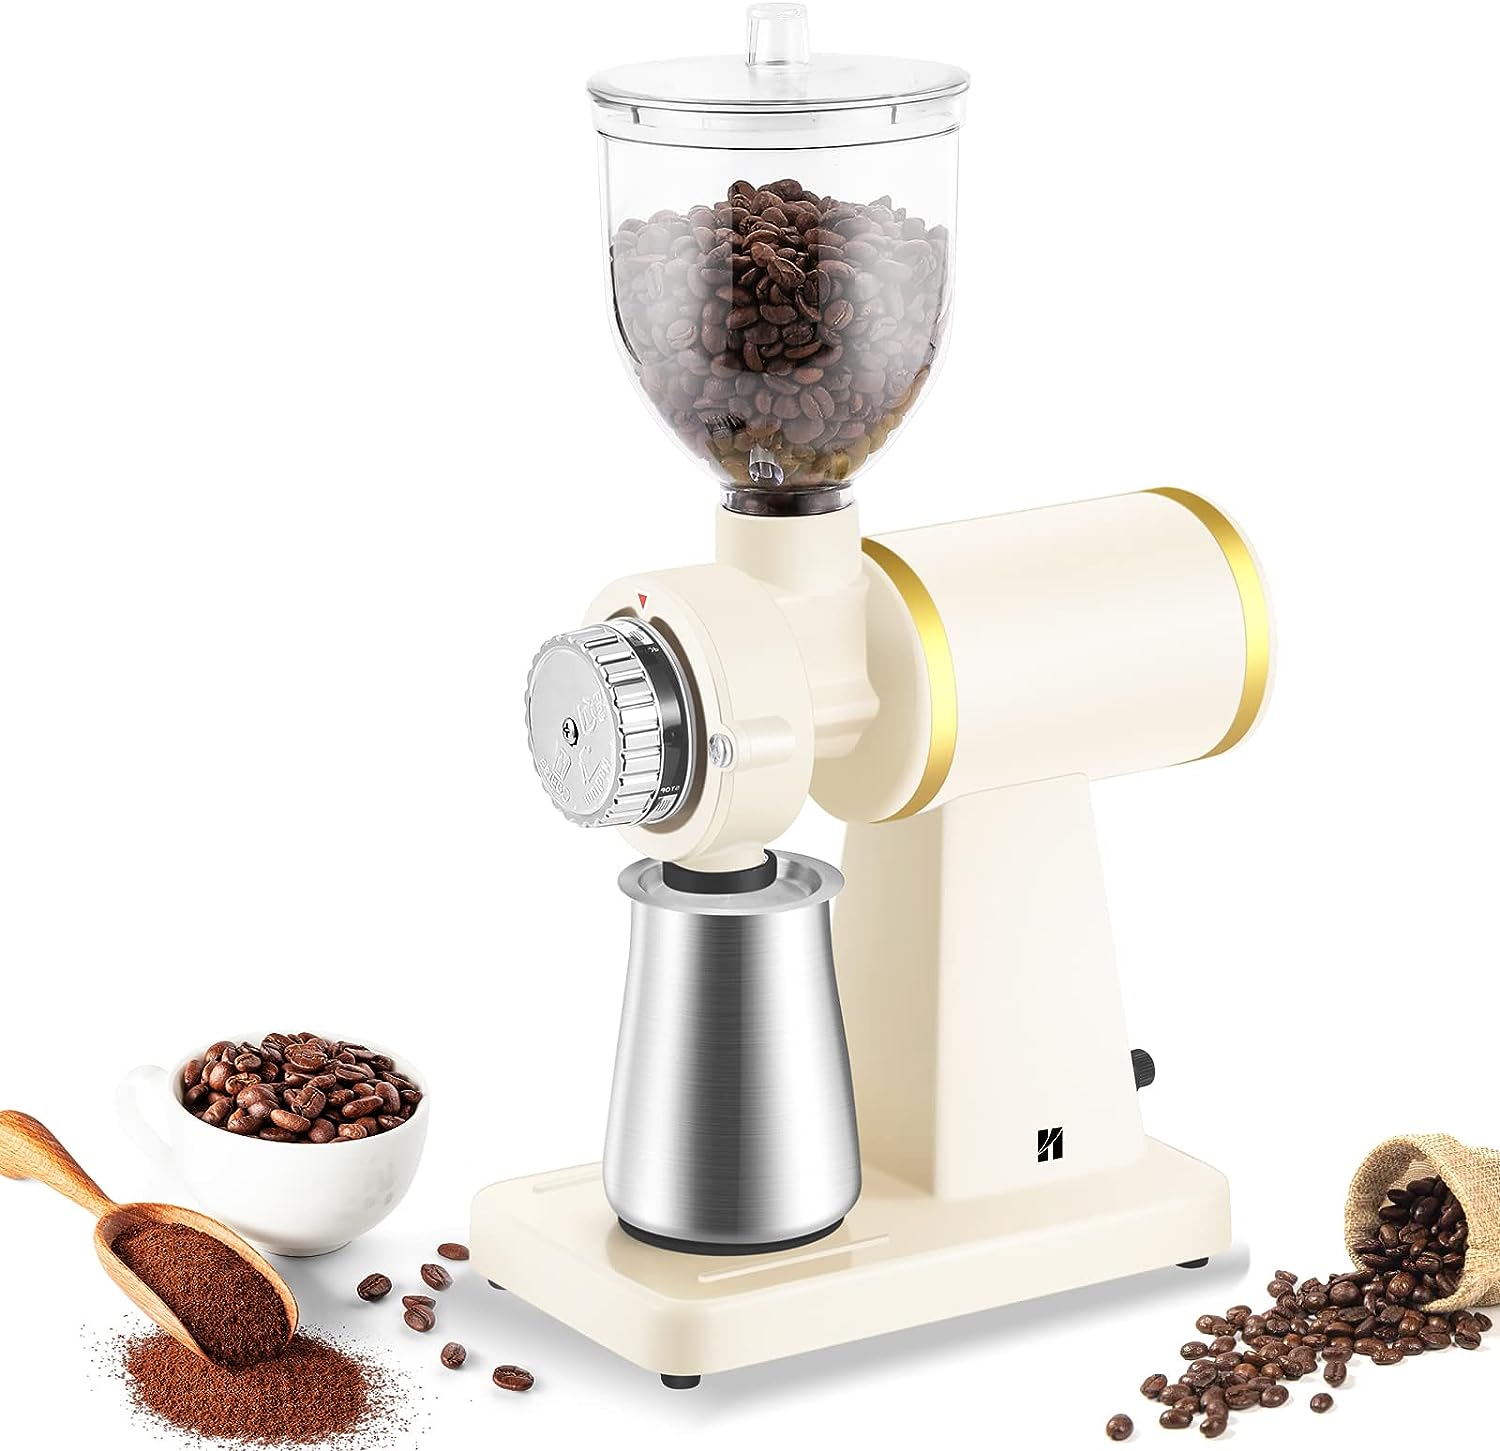 Huanyu Electric Coffee Bean Grinder 250G CommercialHome Milling Grinding Machine 200W Automatic Burr Grinder Professional Miller 8 Fine - Coarse Grind Size Settings (White)